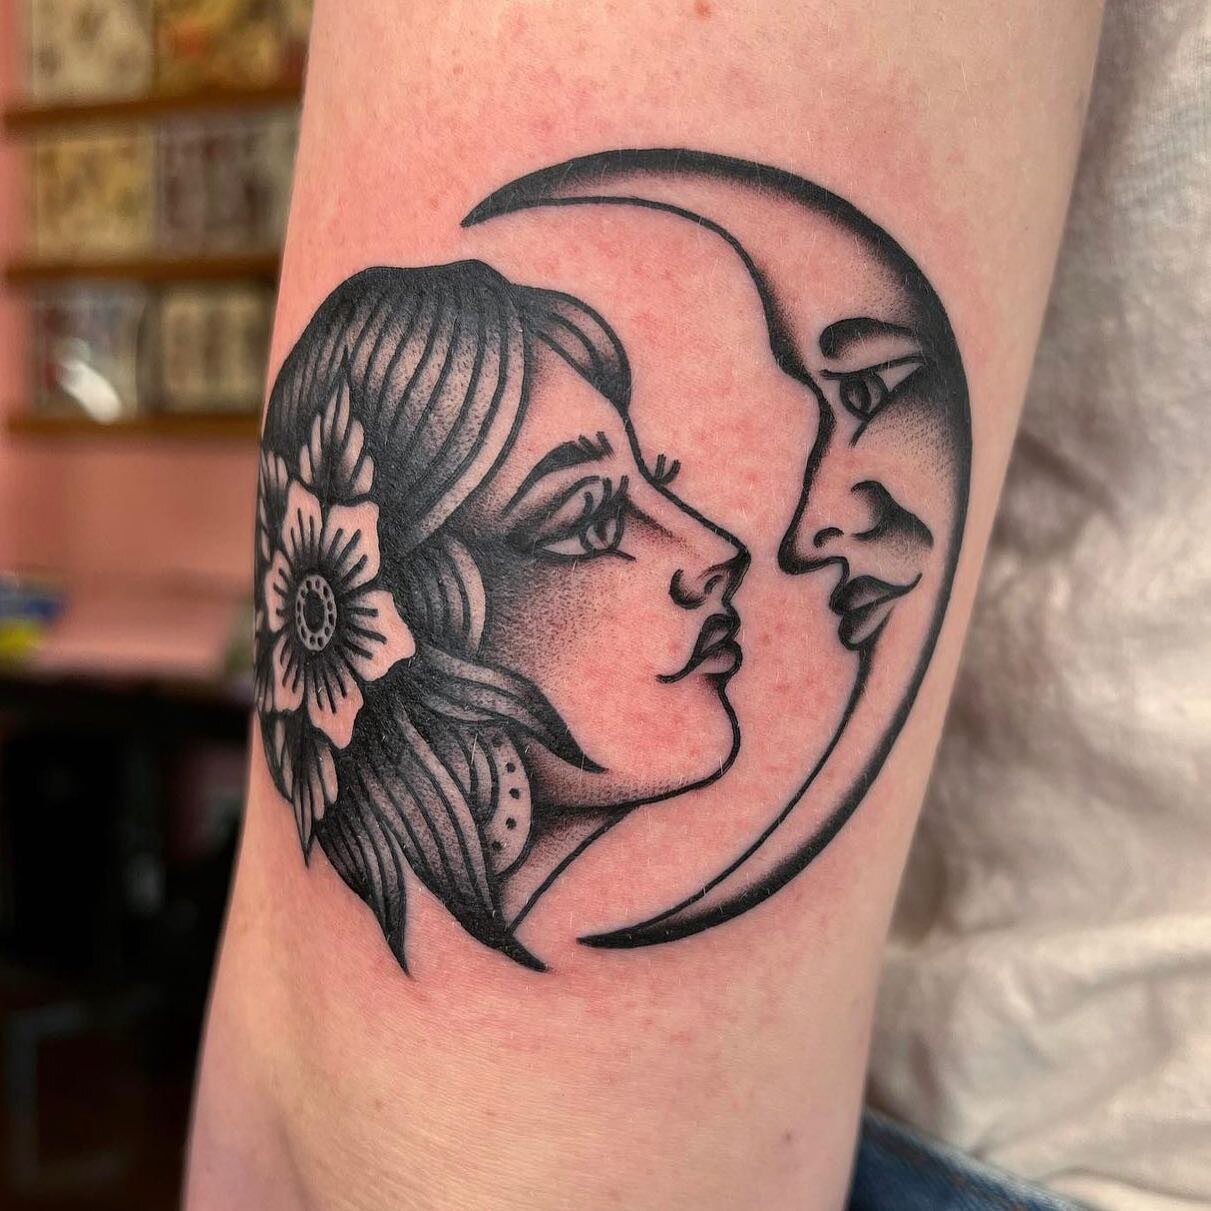 Lady face moon combo tattoo by @kgibsontattoos 

Email her for inquiries on tattoos, all info is on her page. 

#portlandtattooartist #pdxtattooartist #pdxtattooshop #portlandtattooshop